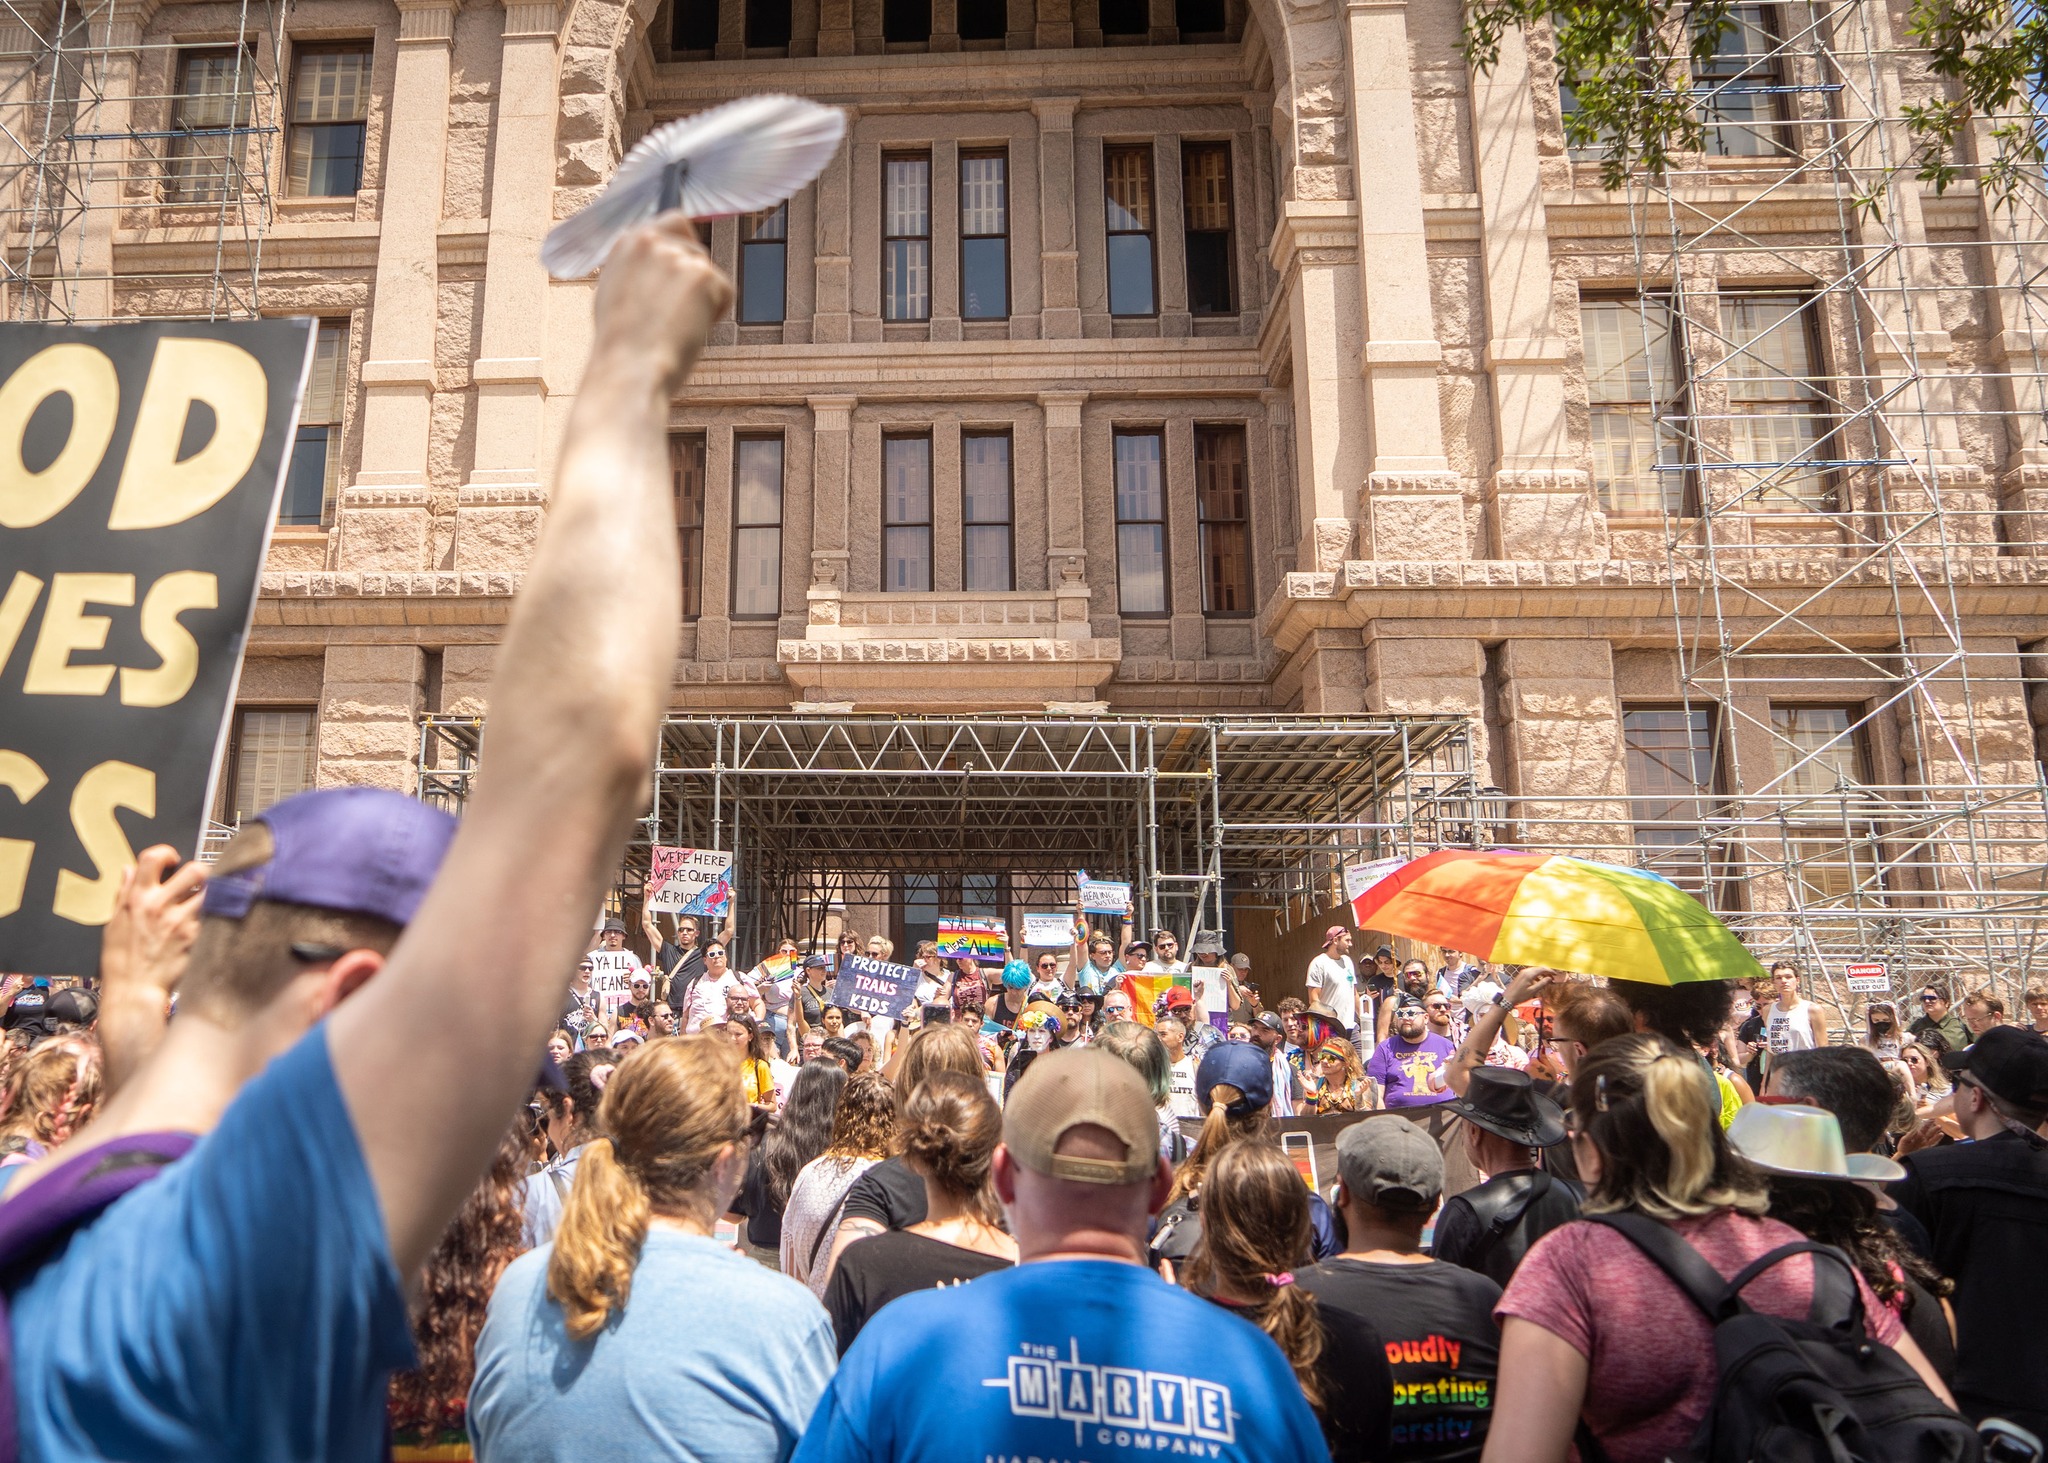 LGBTQ and Trans activists gather on the steps of the Texas State Capitol building protesting slate of anti-LGBTQ measures earlier this month (Photo Credit Equality Texas)